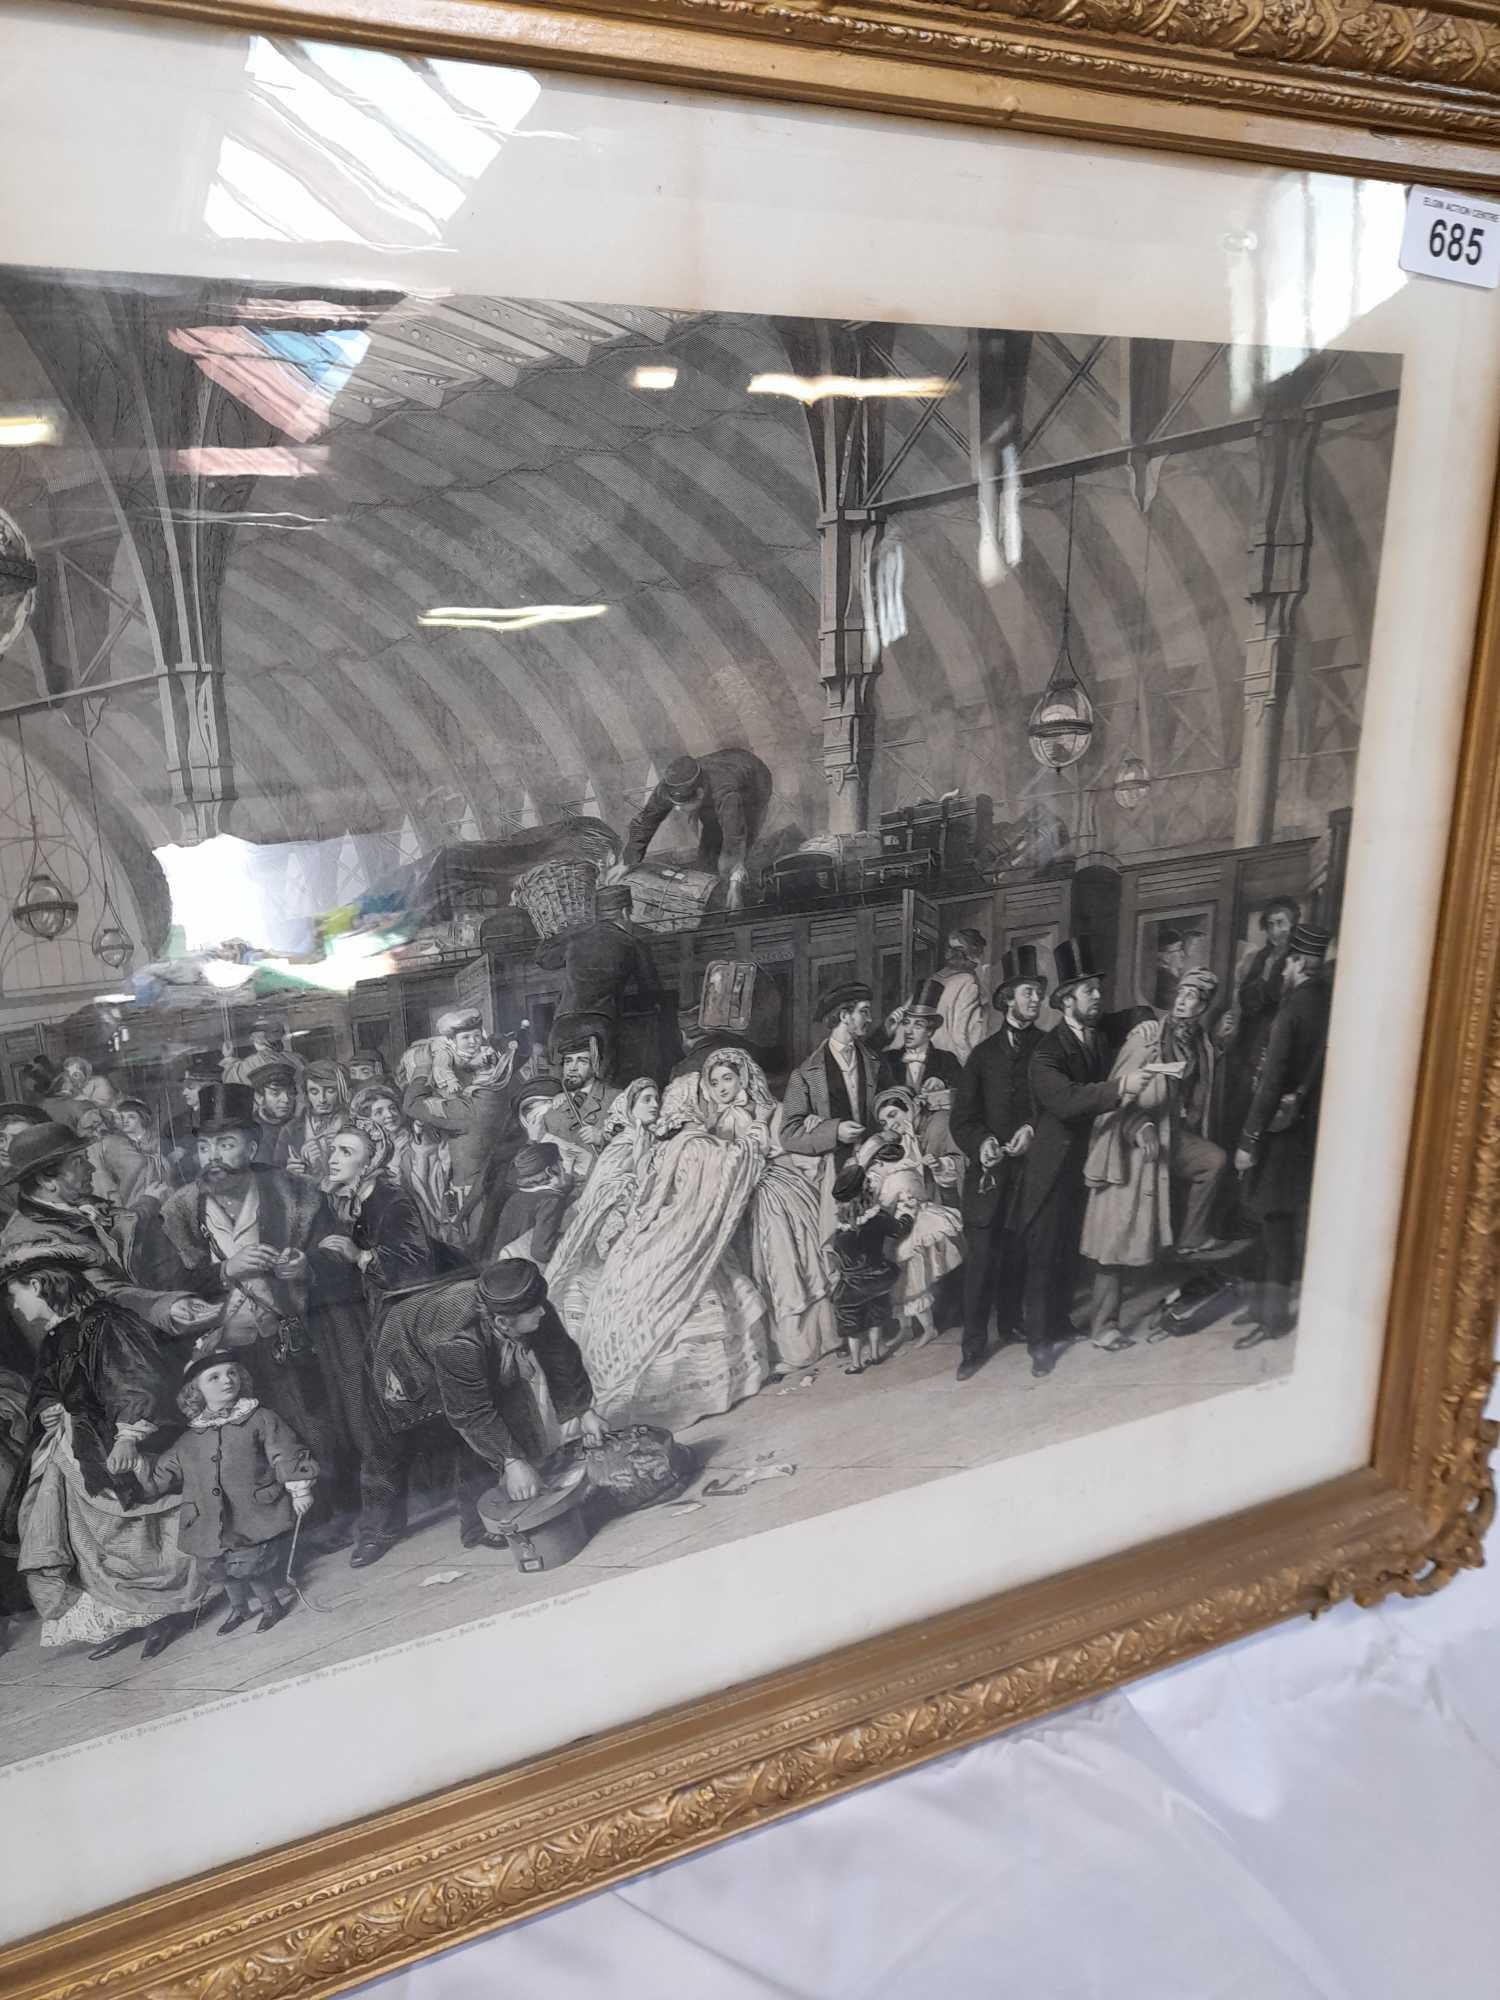 LARGE PRINT- THE RAILWAY STATION - Image 16 of 24